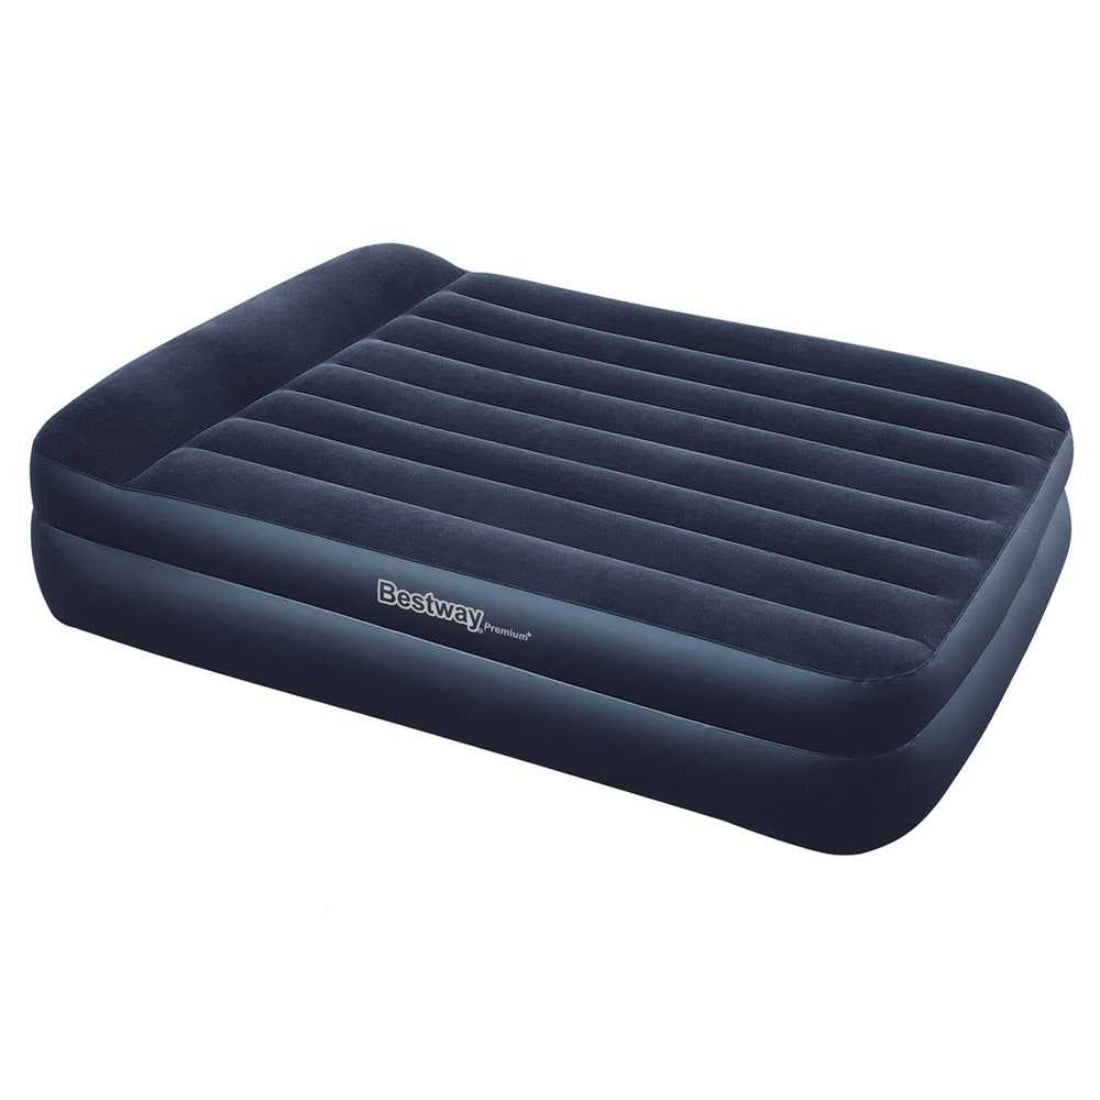 Bestway Luxury Air Bed Queen Size Inflatable Mattress Electric Pump